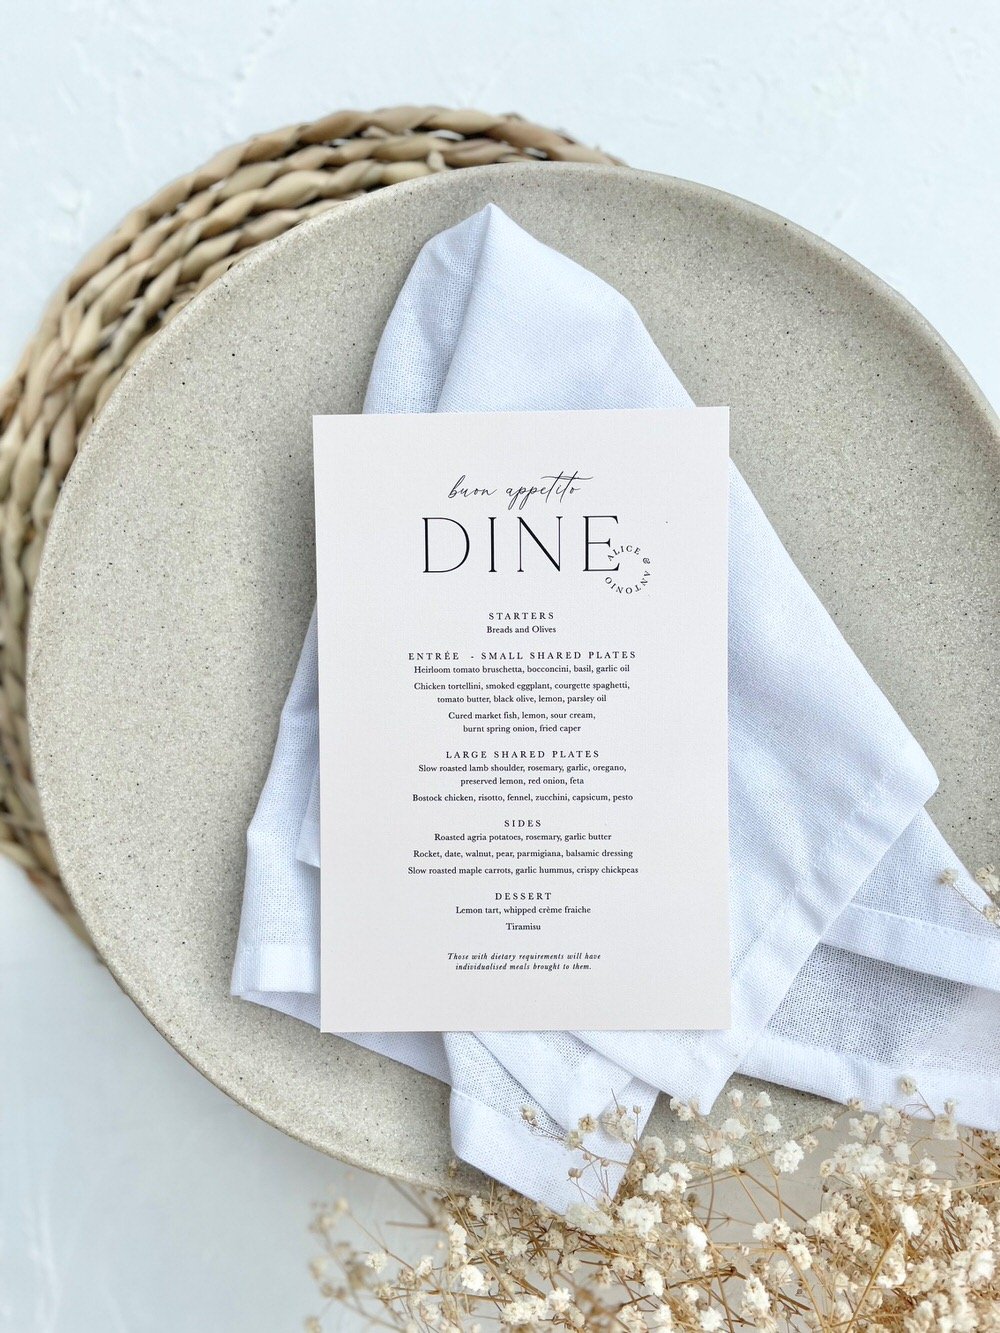 Just My Type Wedding Invitation Stationery NZ Wedding Menu Place Name Table Number2847.jpg